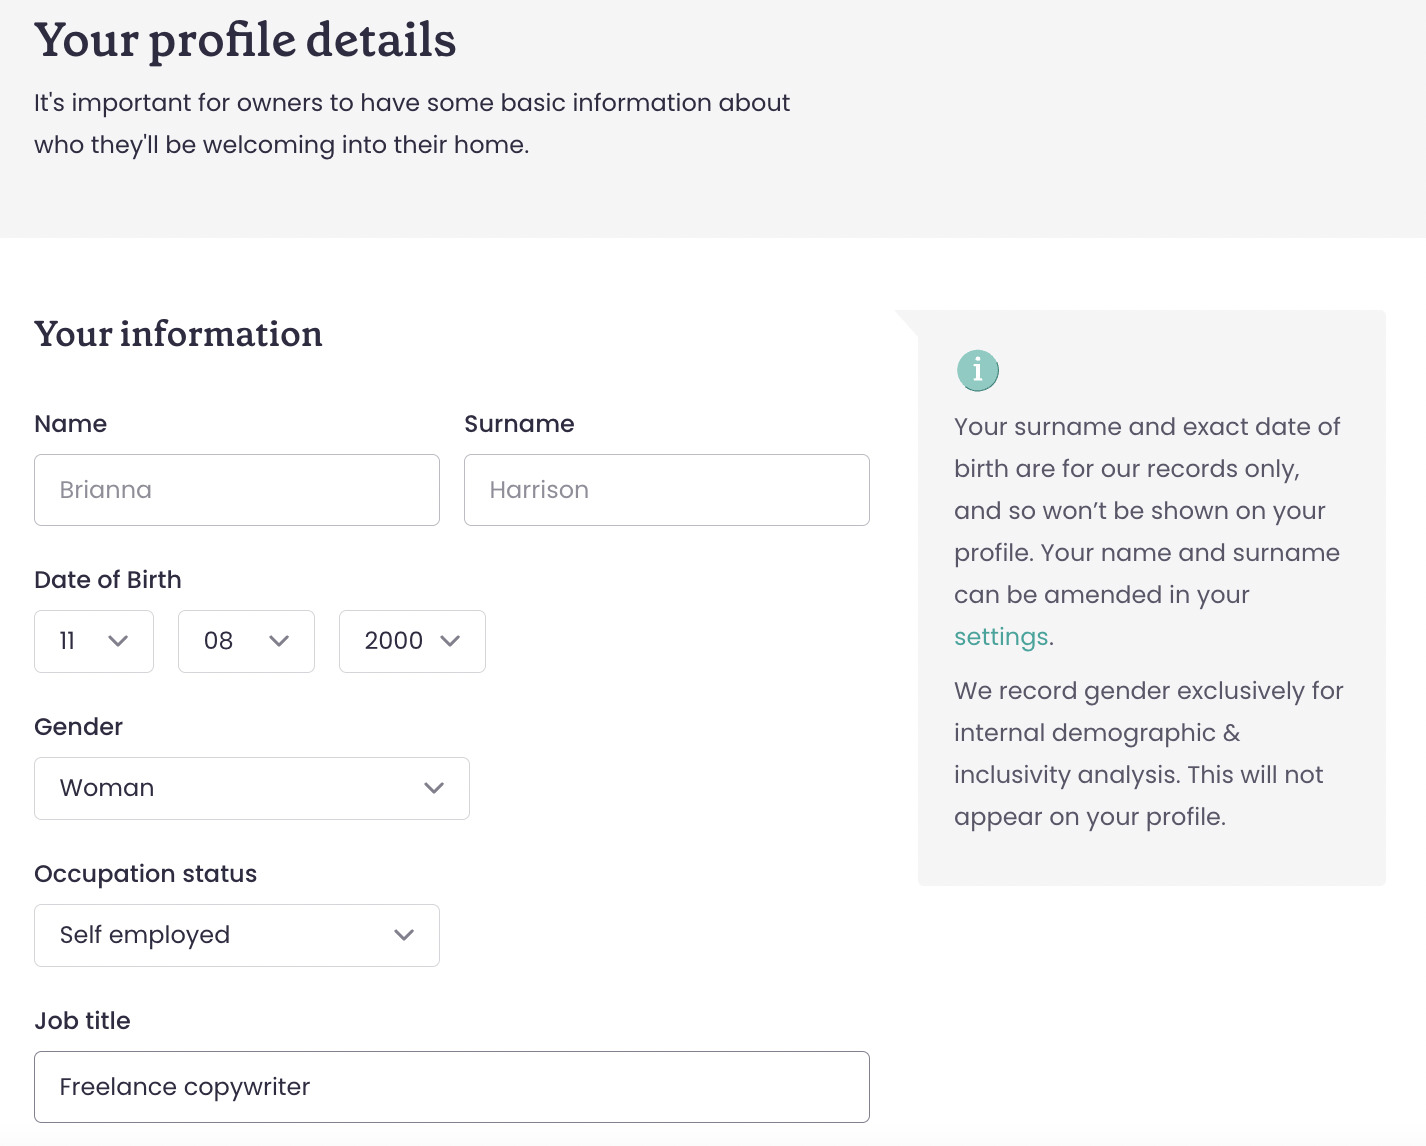 A screenshot of your profile details including name, date of birth, and occupation status. 